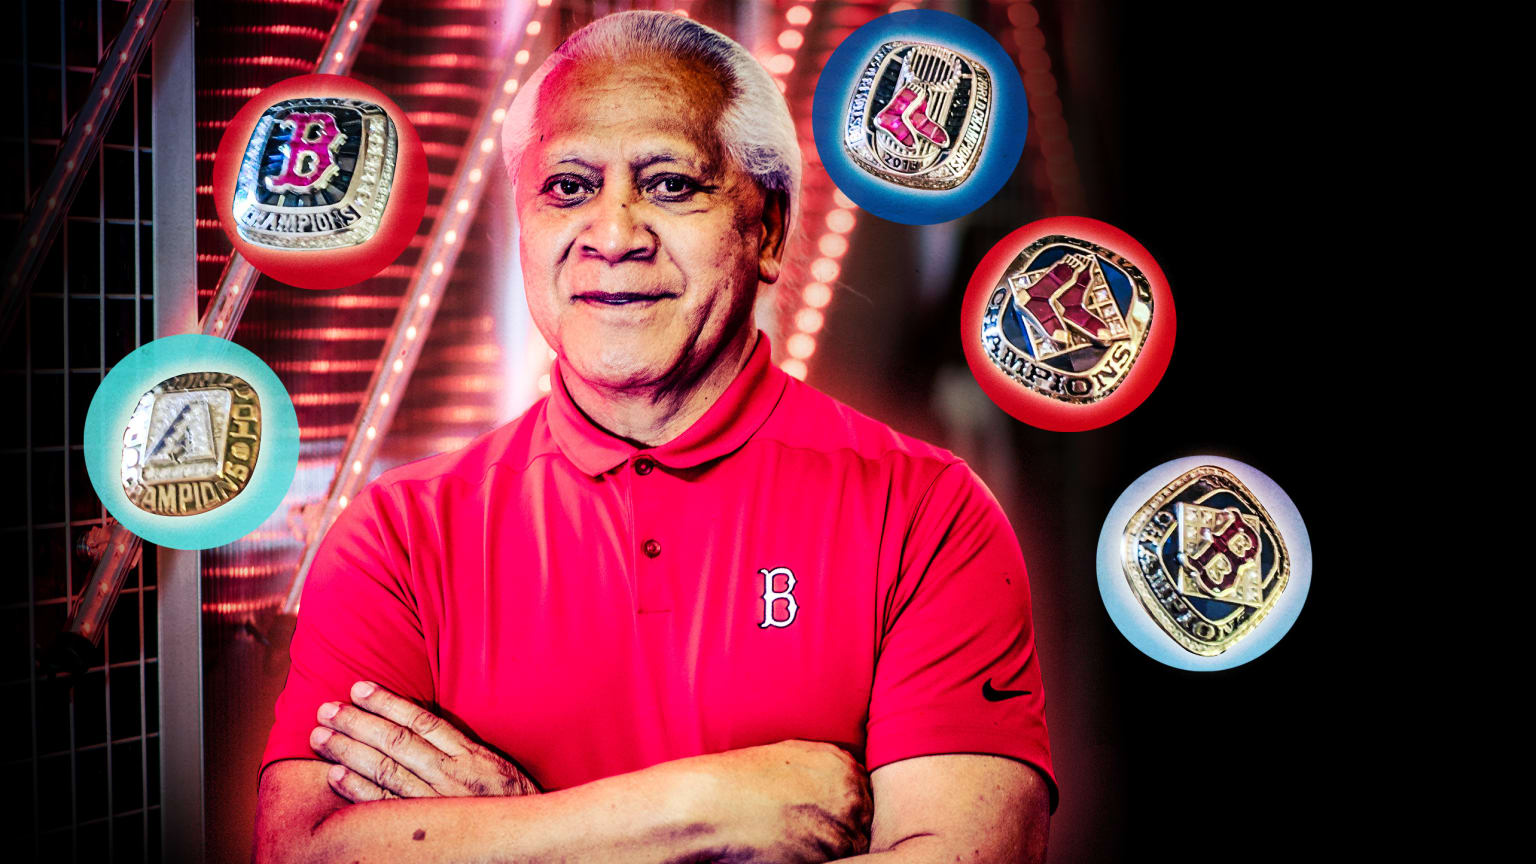 Russell Noa is pictured with images of his five World Series rings